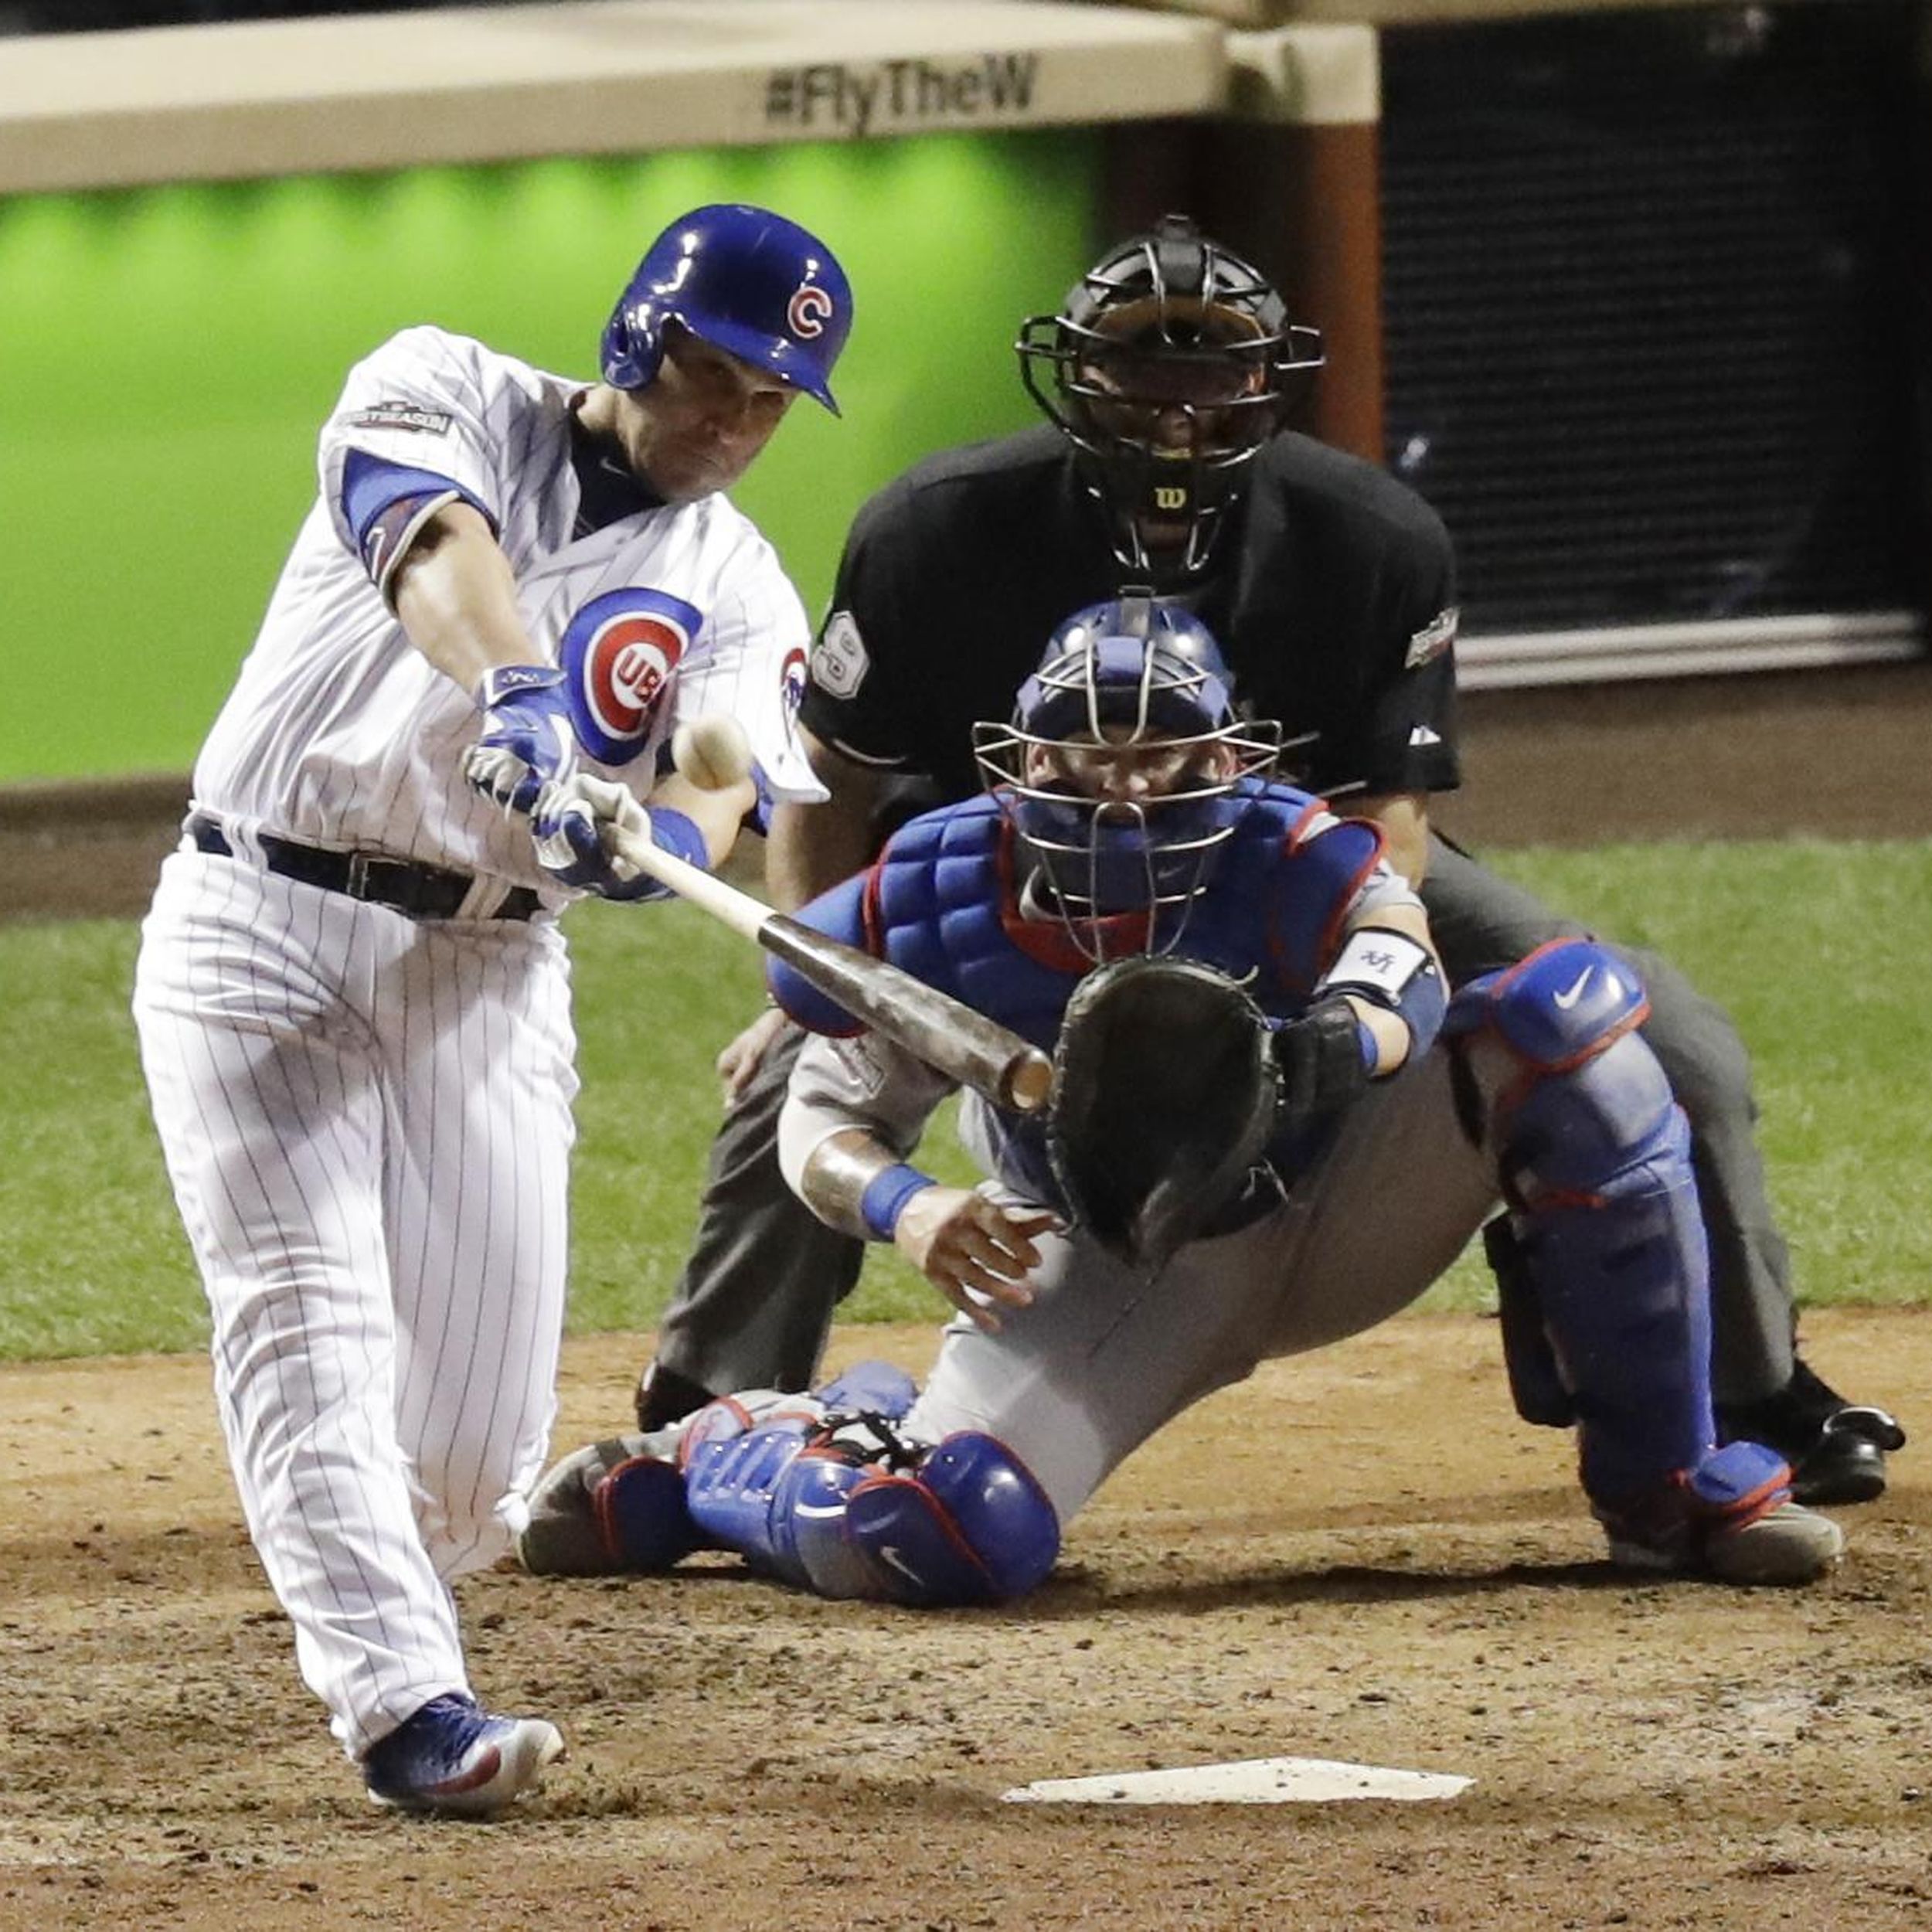 CatchersWhoPitch: Miguel Montero was the Cubs' best pitcher on Saturday